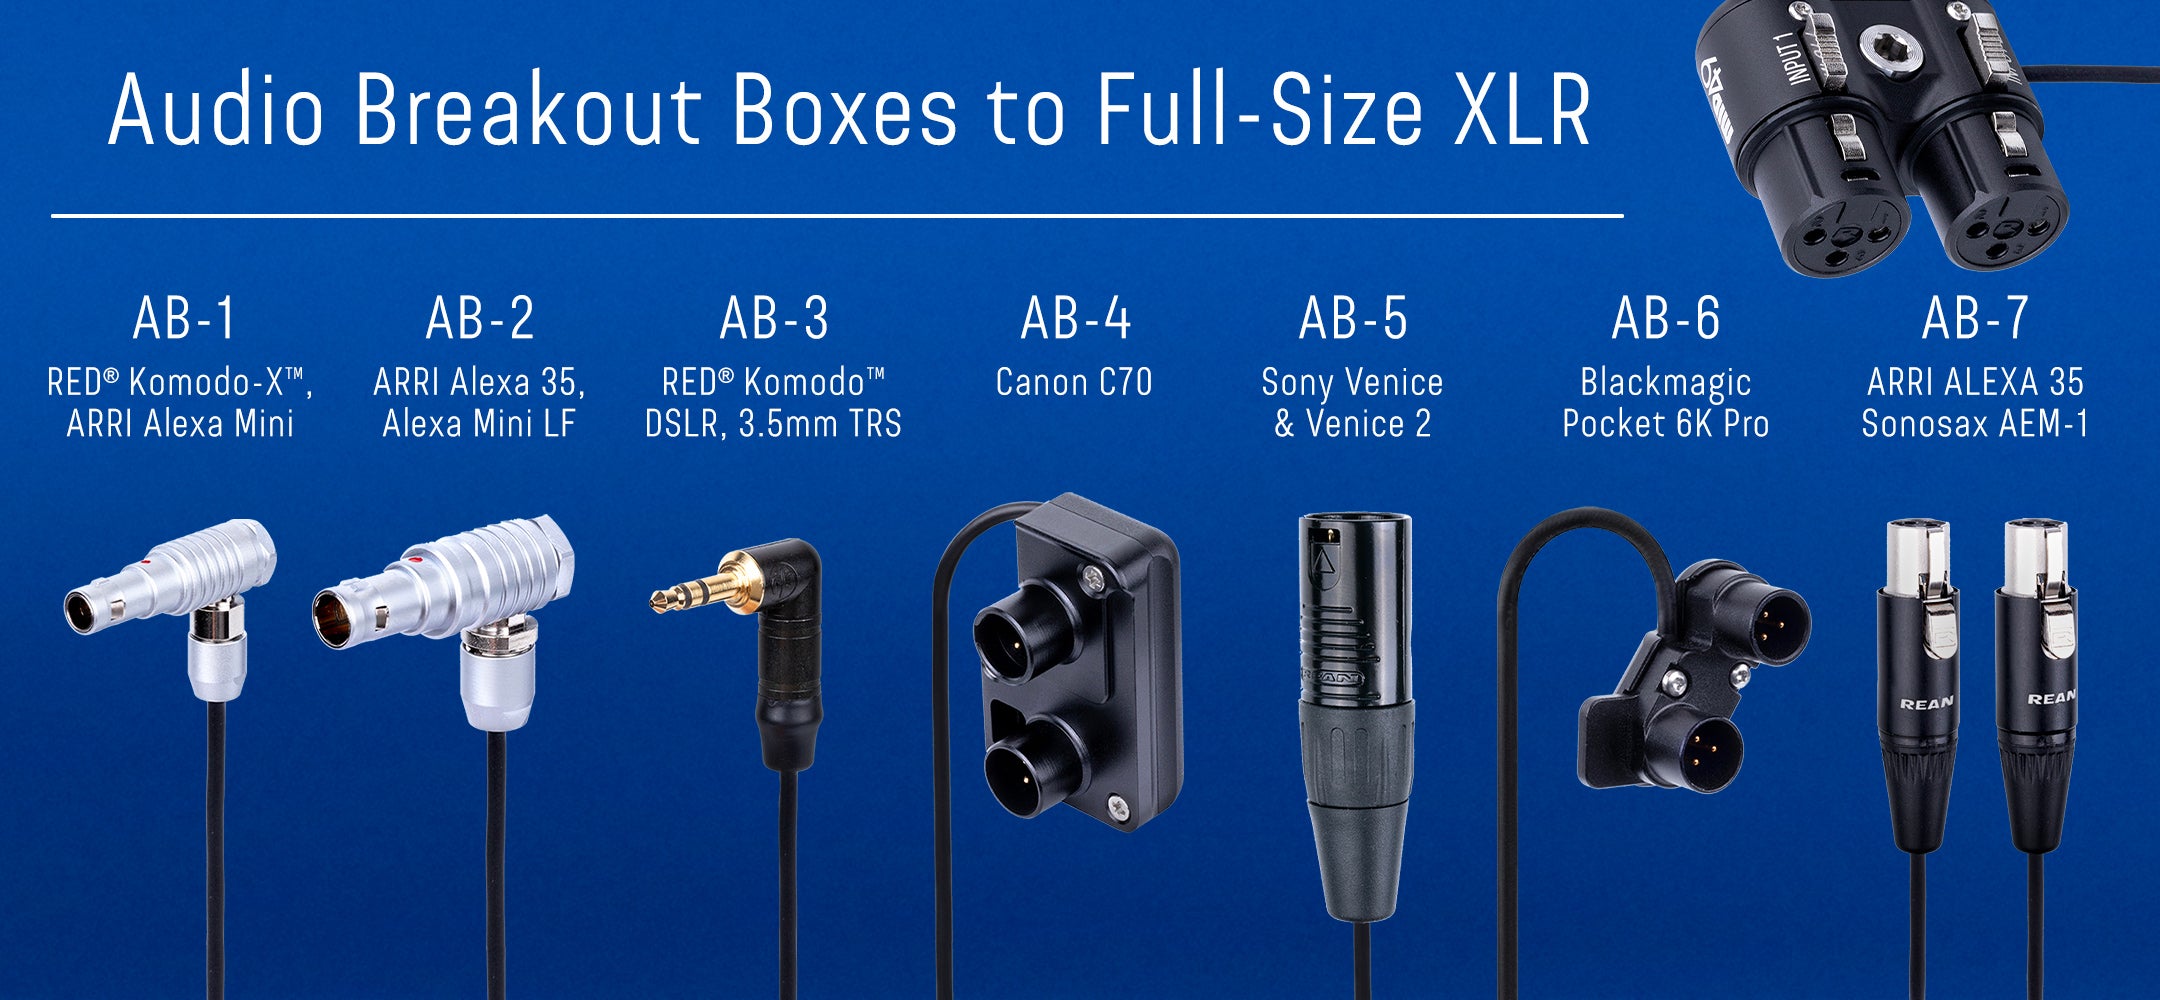 XLR adapters for nearly every camera!